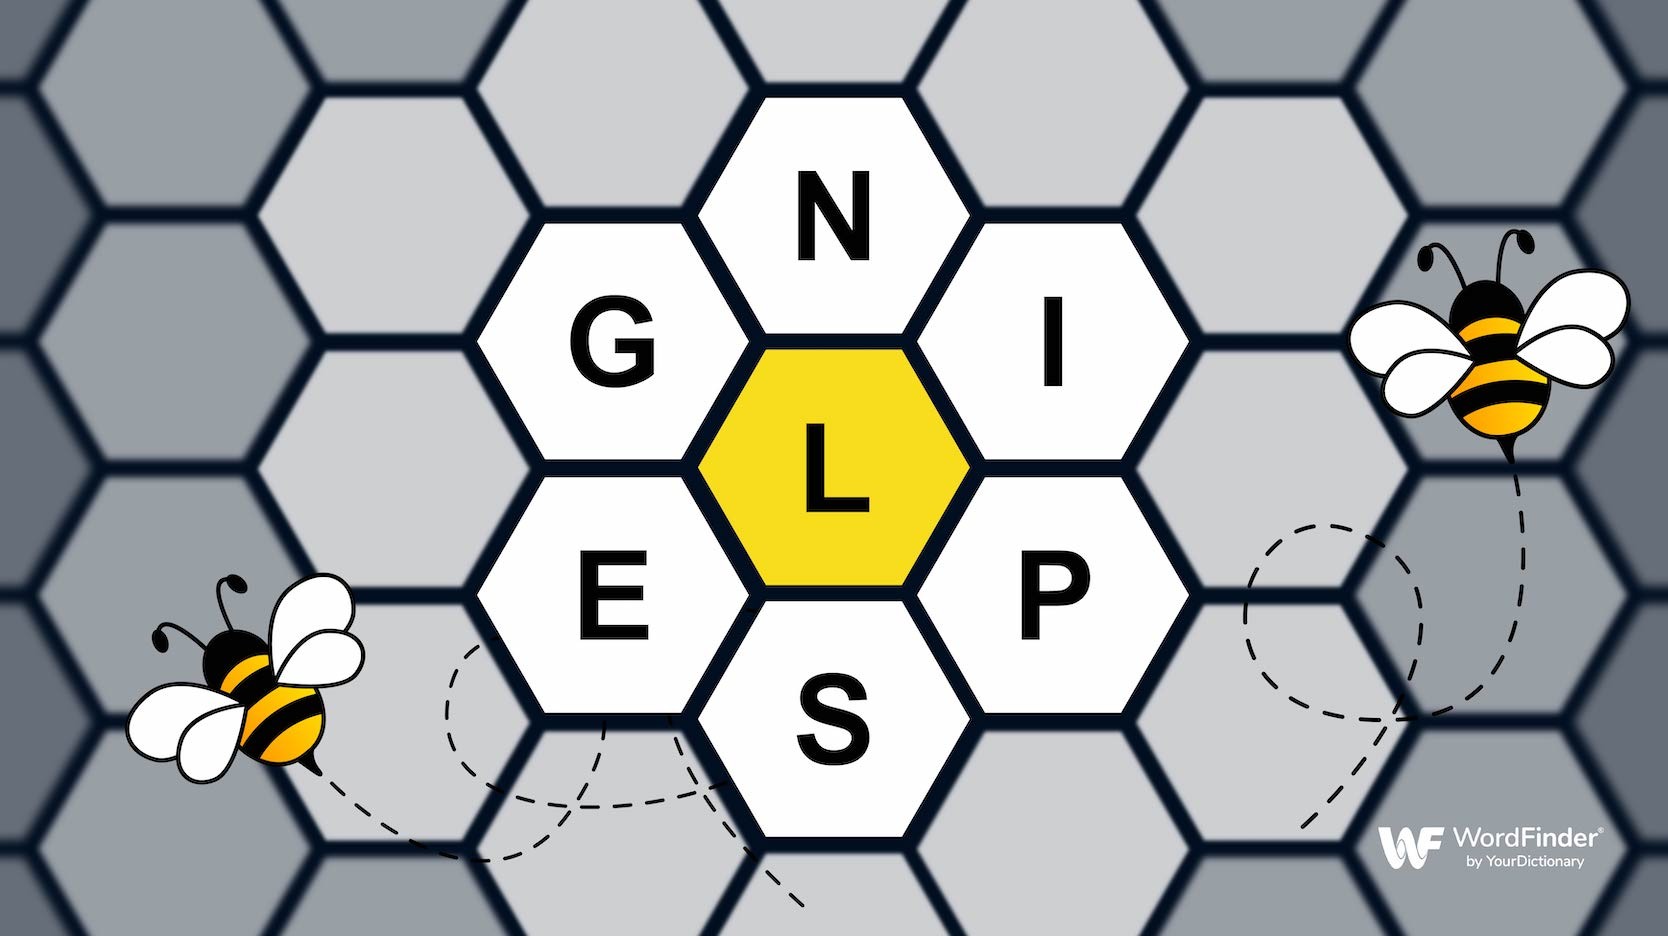 Spelling Bee Nyt Free NYT Spelling Bee: The Buzz Around the Online Word Puzzle